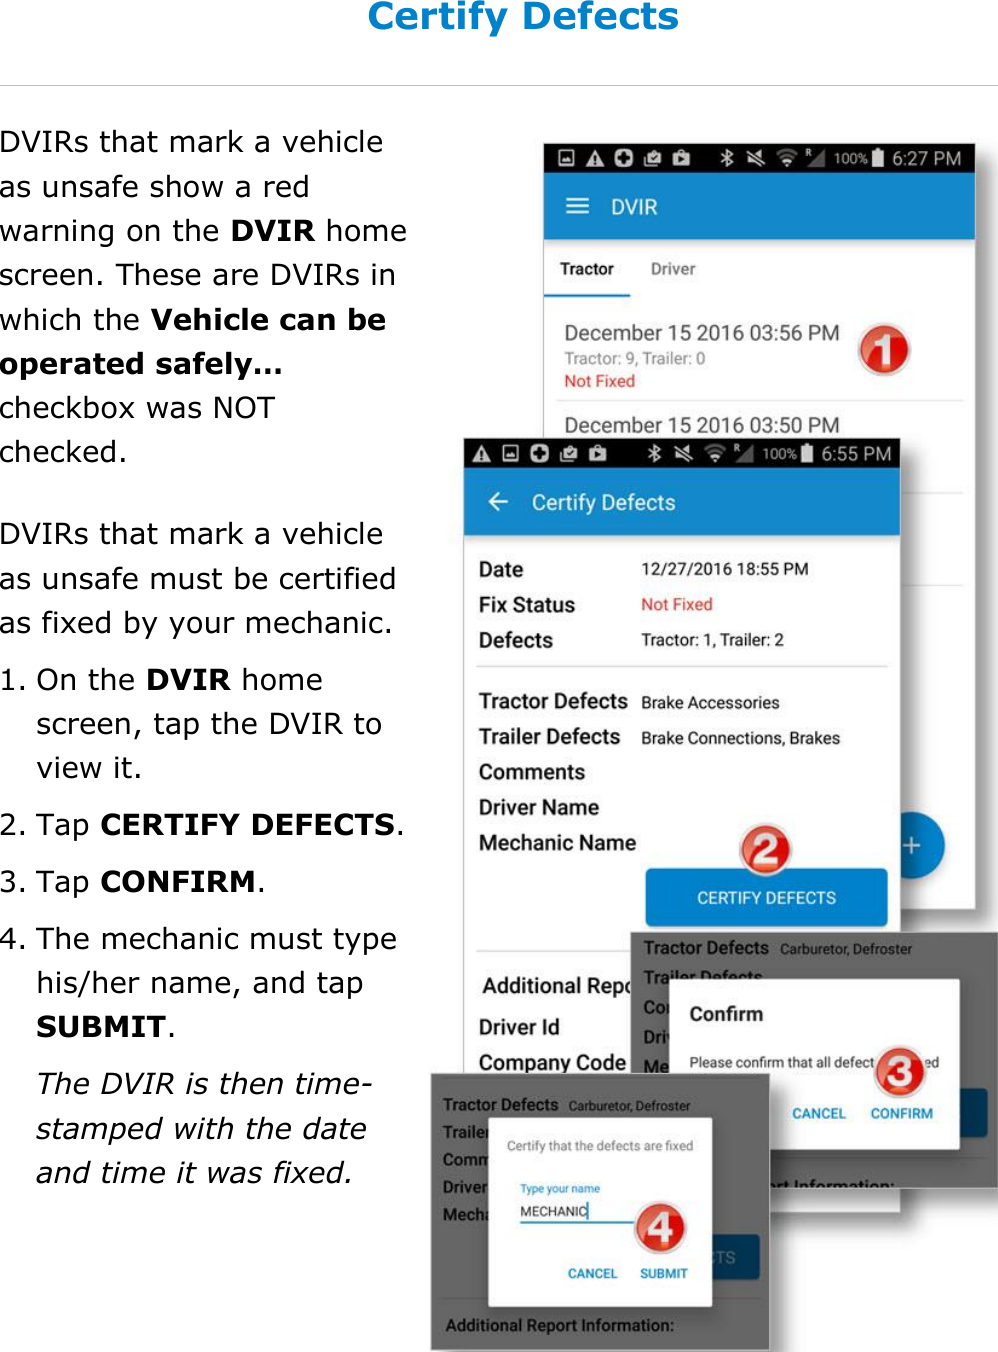 Complete a DVIR DriverConnect User Guide  59 © 2017, Rand McNally, Inc. Certify Defects DVIRs that mark a vehicle as unsafe show a red warning on the DVIR home screen. These are DVIRs in which the Vehicle can be operated safely… checkbox was NOT checked. DVIRs that mark a vehicle as unsafe must be certified as fixed by your mechanic. 1. On the DVIR home screen, tap the DVIR to view it. 2. Tap CERTIFY DEFECTS. 3. Tap CONFIRM. 4. The mechanic must type his/her name, and tap SUBMIT. The DVIR is then time-stamped with the date and time it was fixed.  